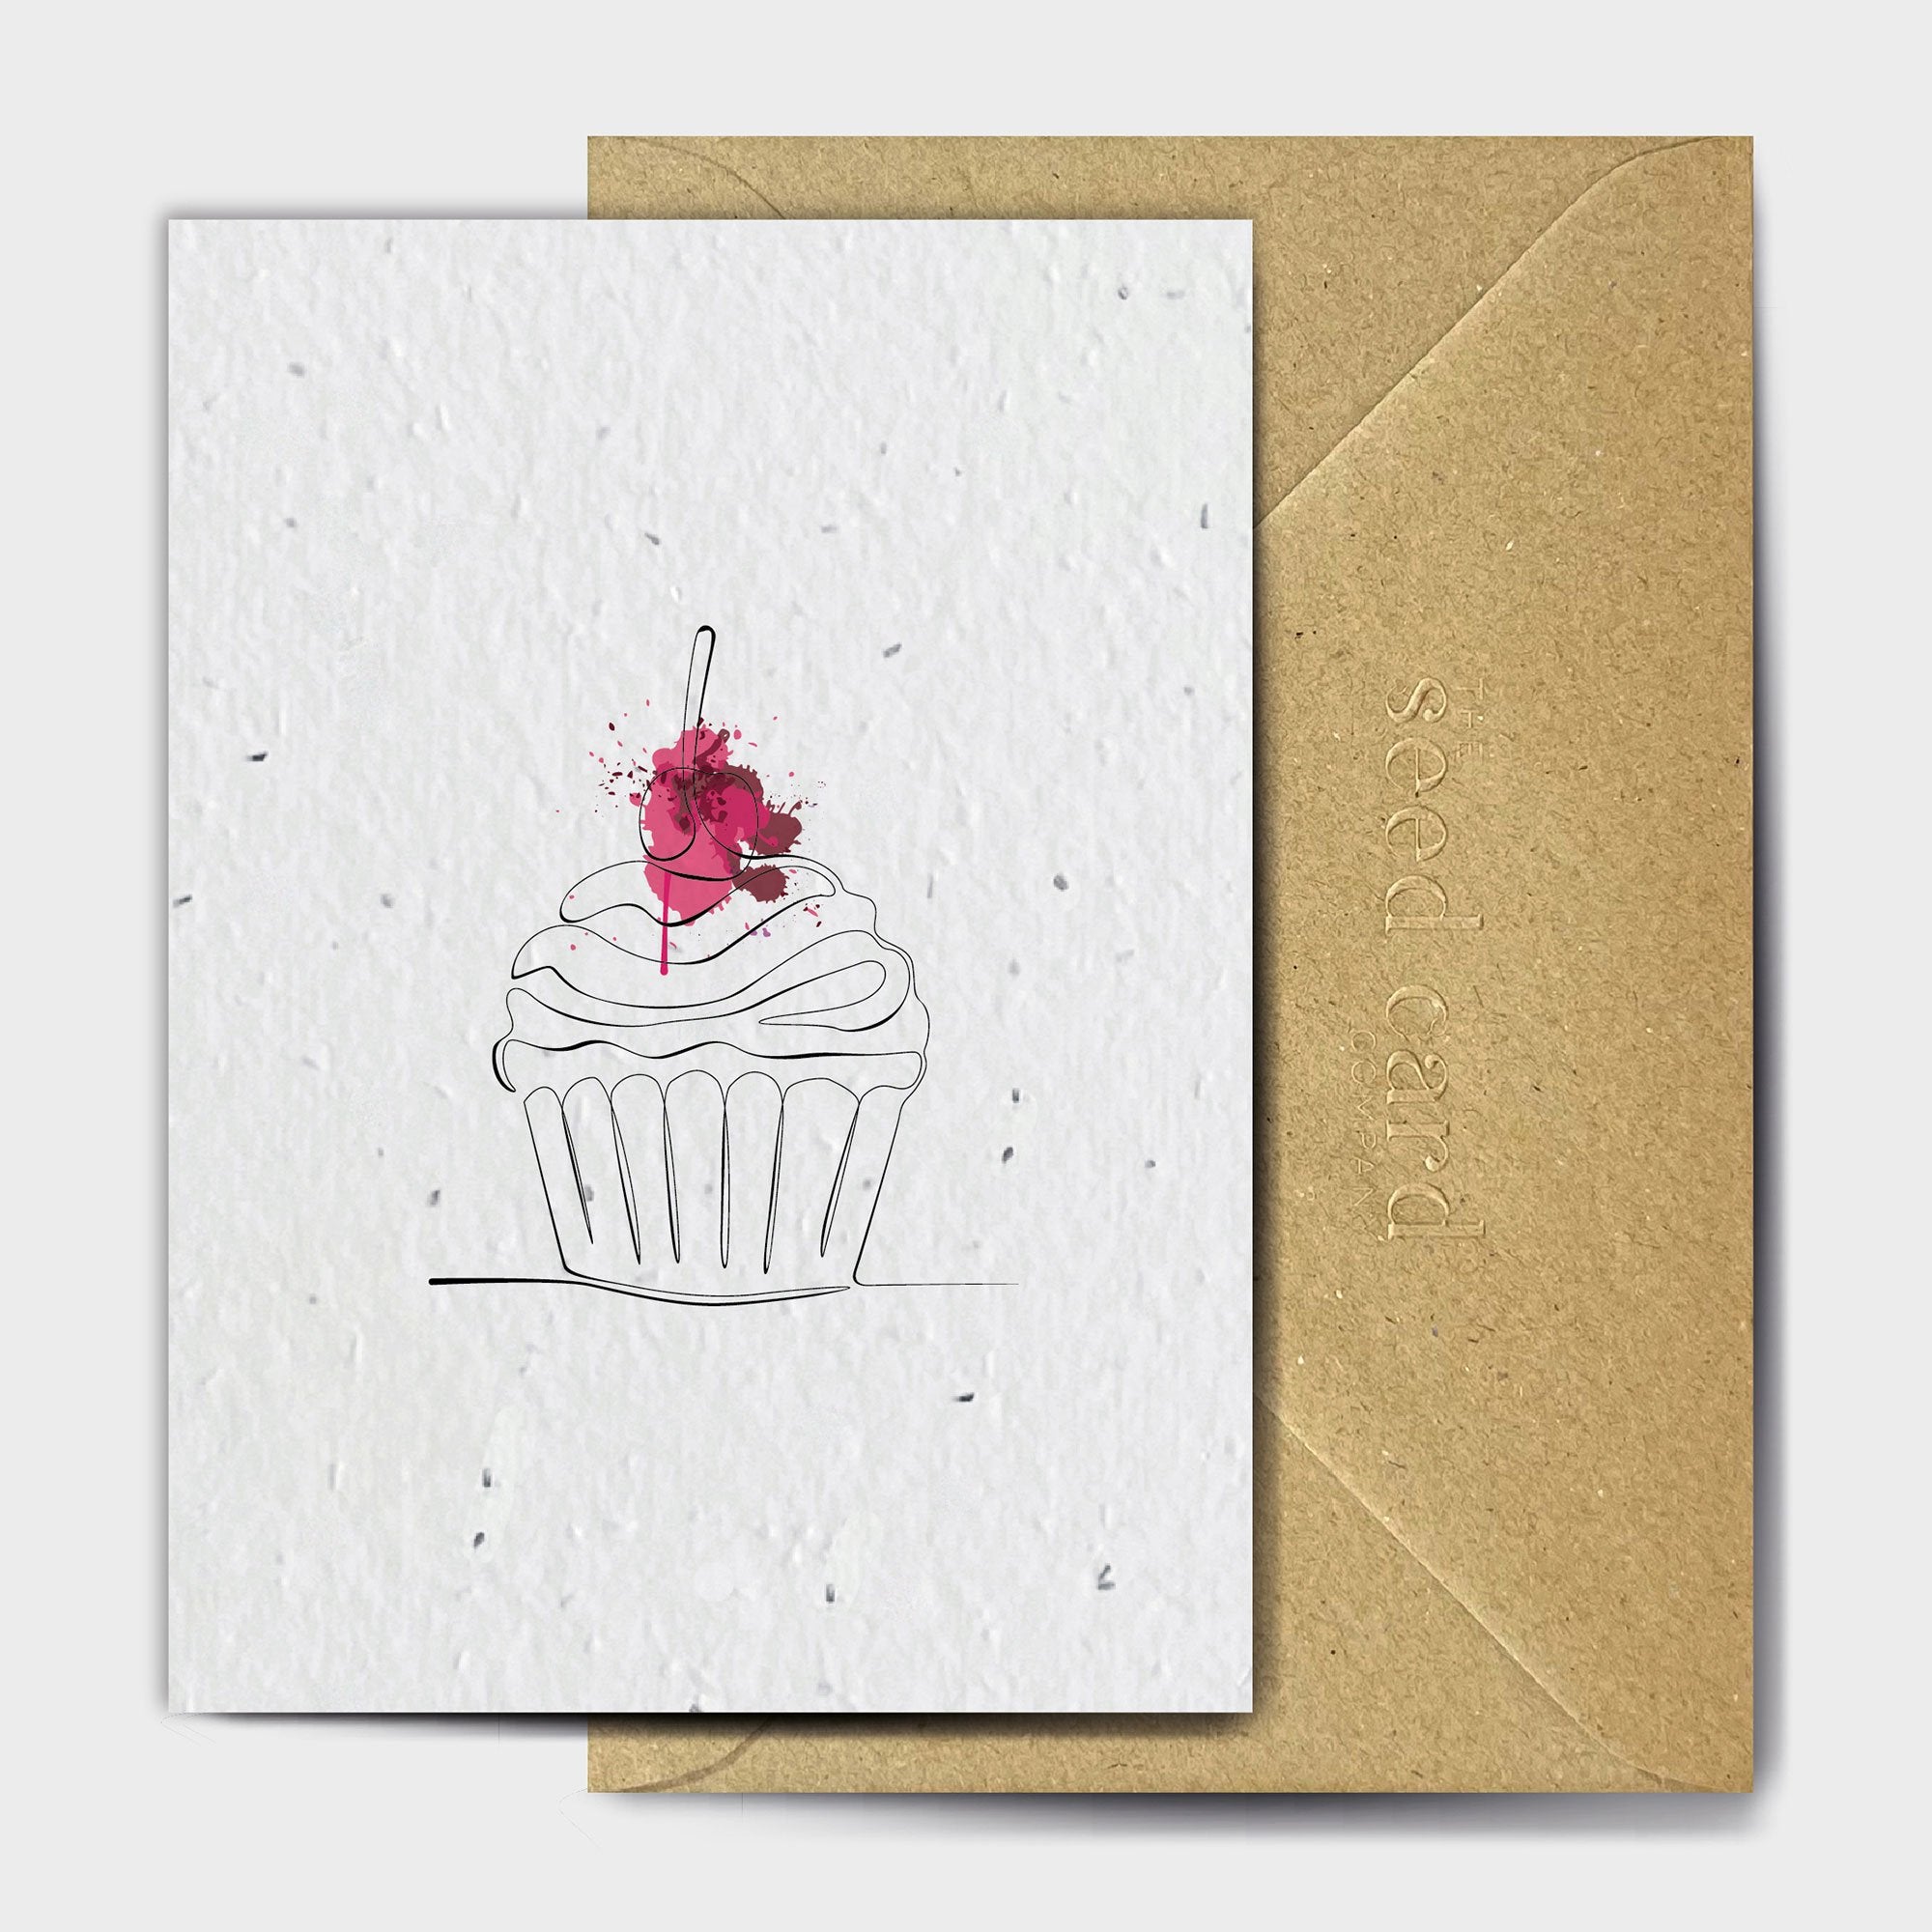 Shop online The Cherry On Top - 100% biodegradable seed-embedded cards Shop -The Seed Card Company